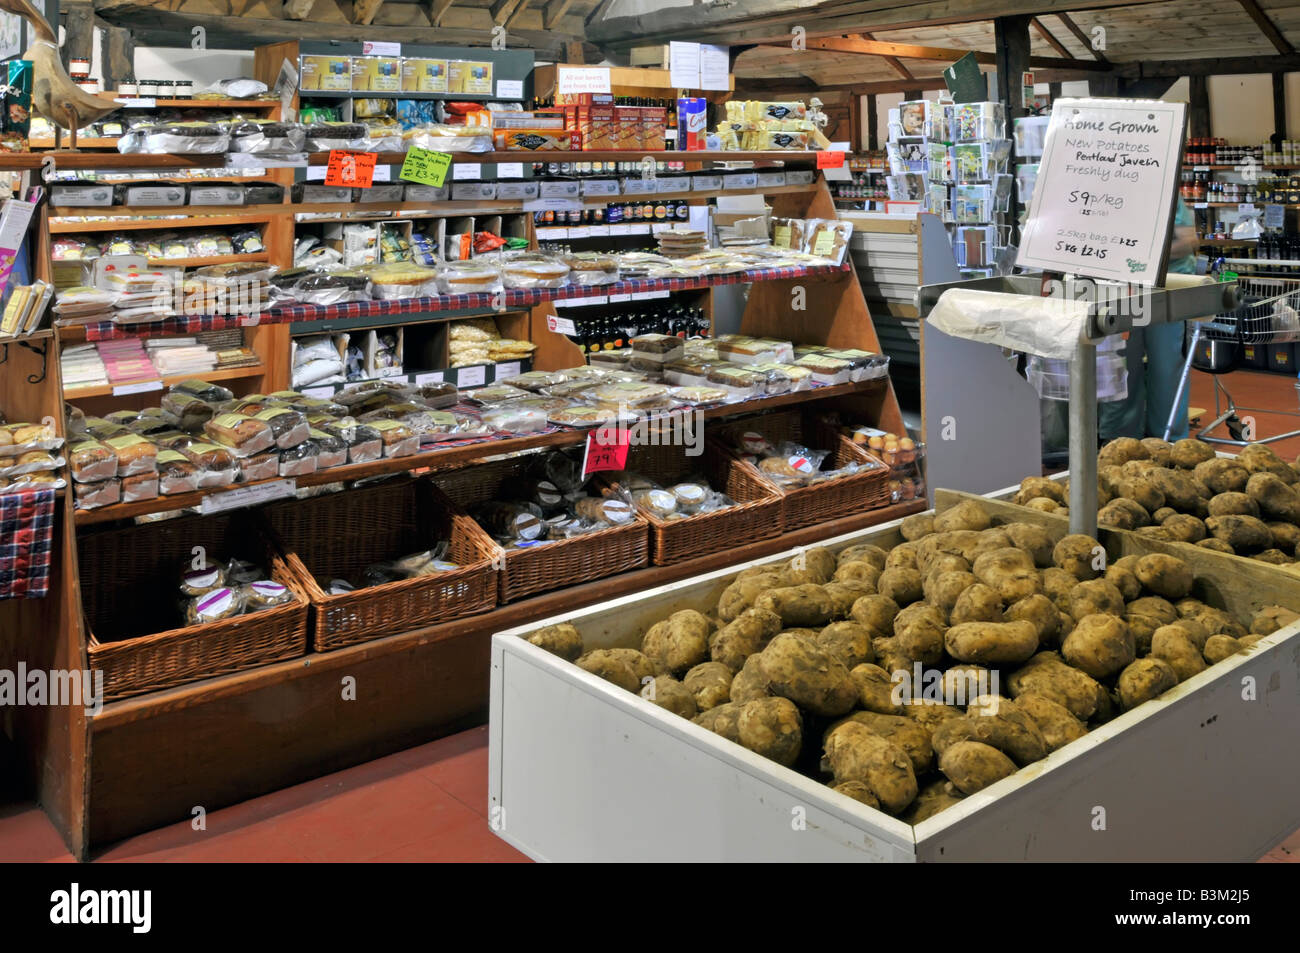 Interior view of property released retail farm shop business produce on display including Pentland Javelin potatoes Brentwood Essex England UK Stock Photo